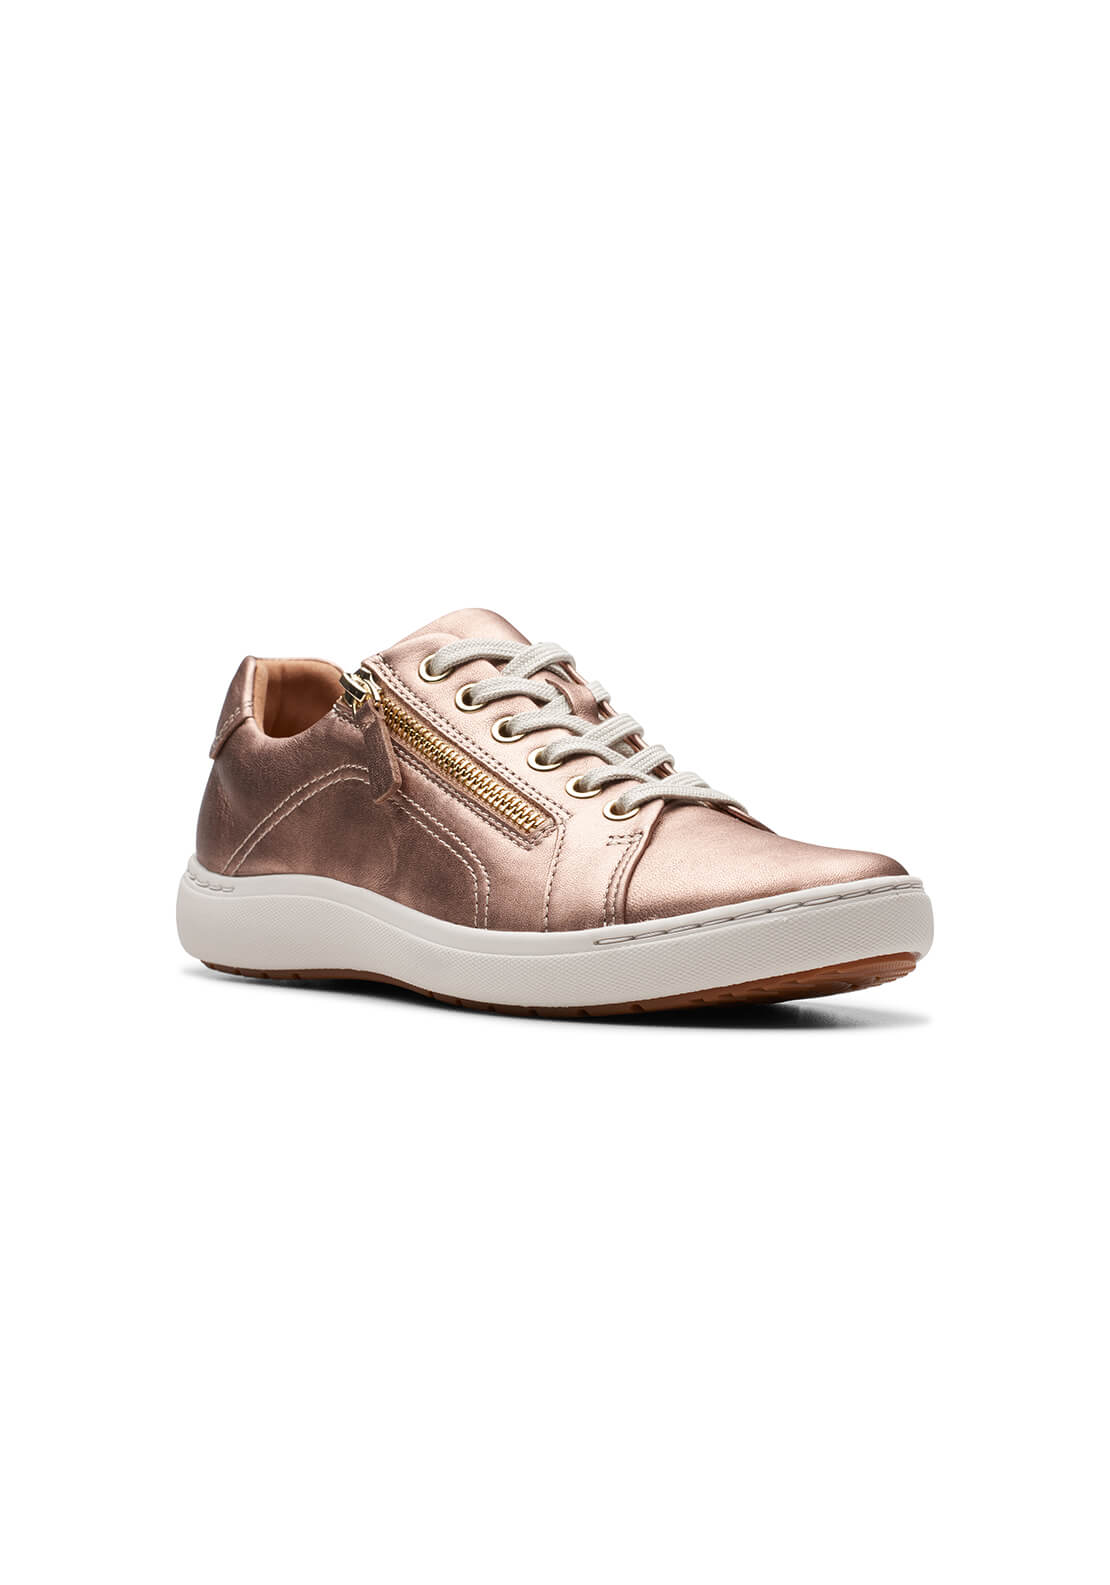 Clarks Nalle Lace Zip Trainer - Rose Gold 6 Shaws Department Stores